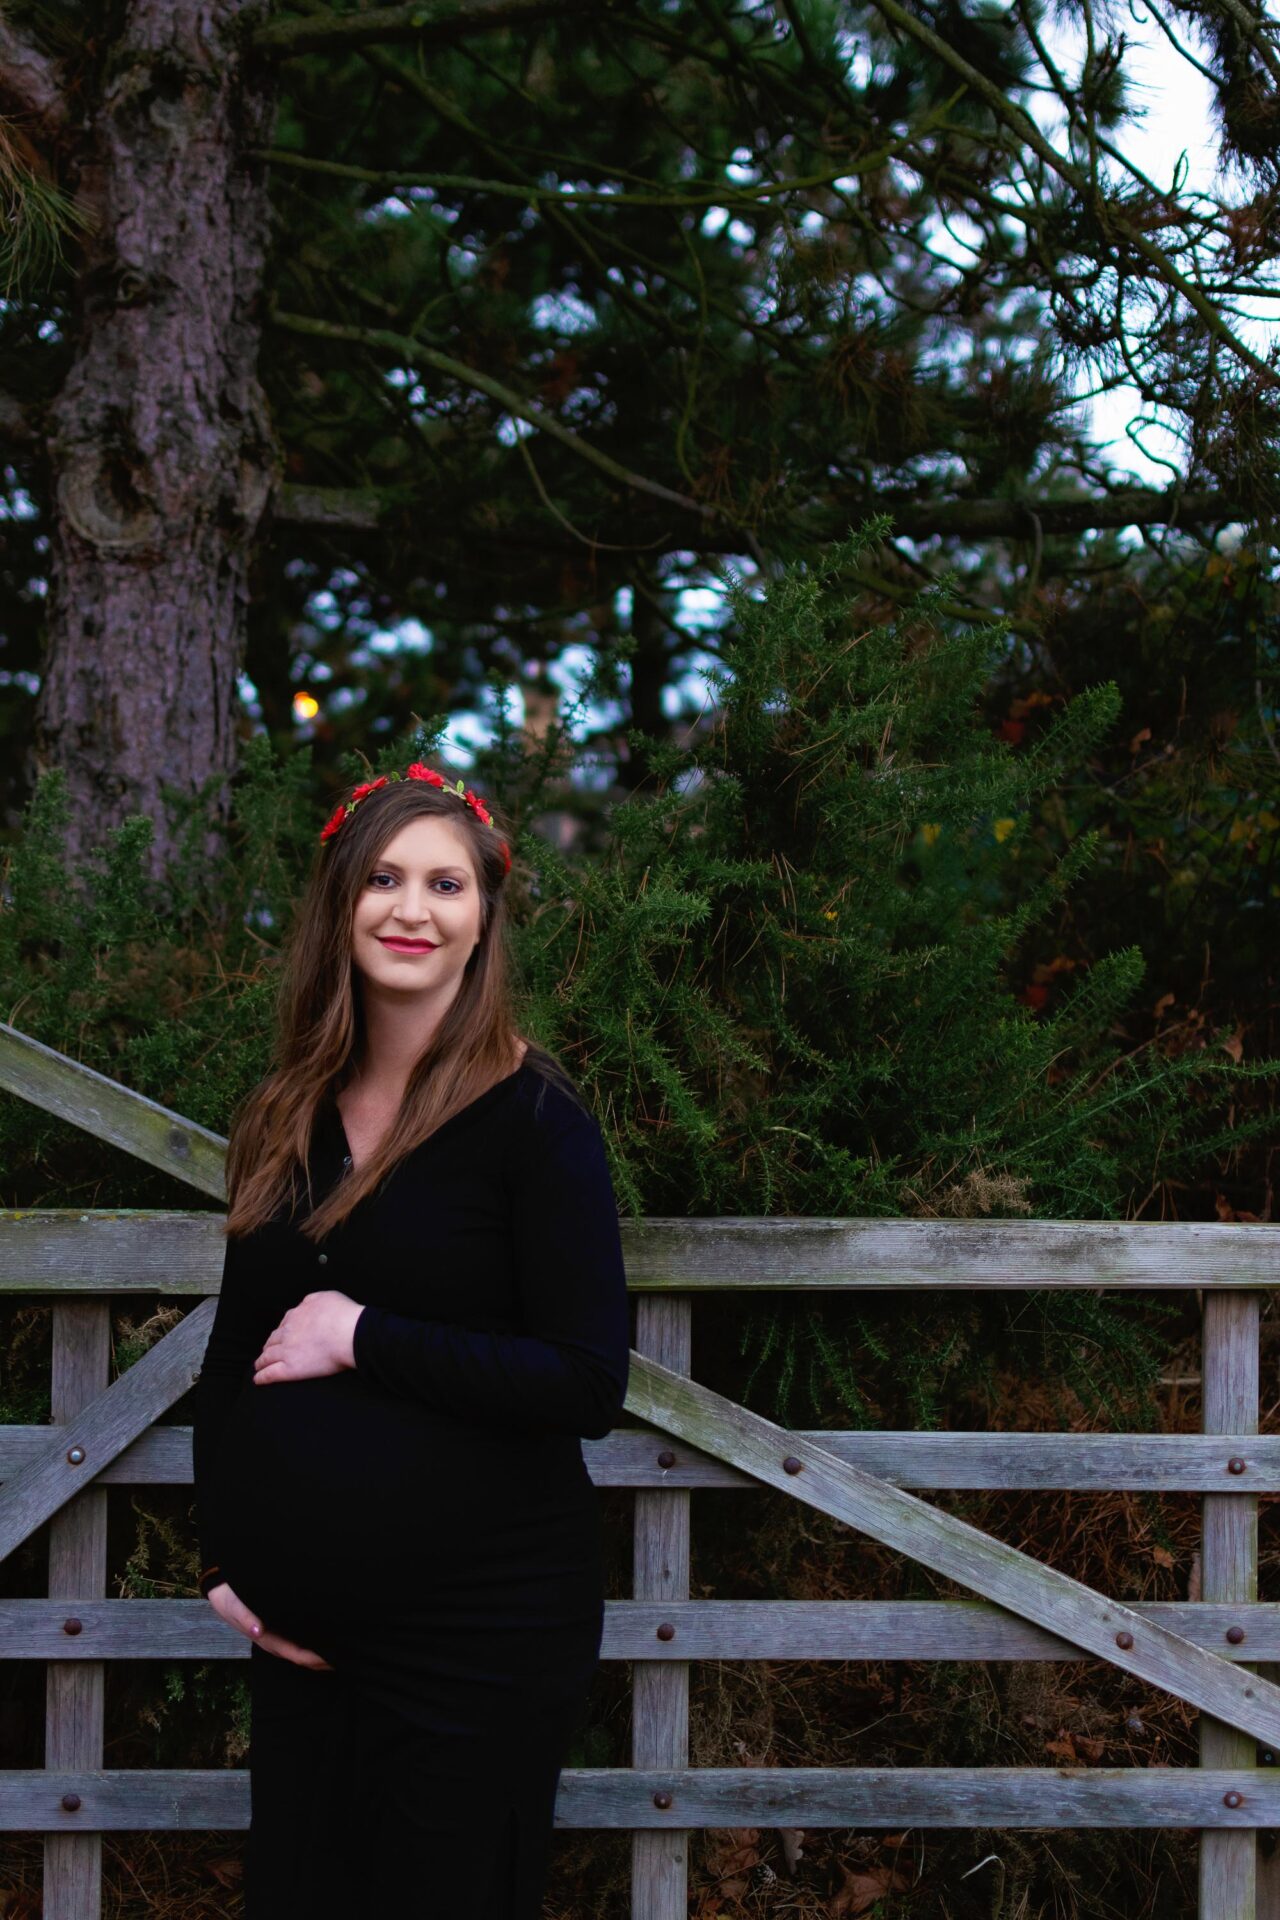 maternity photography in kings hill kent